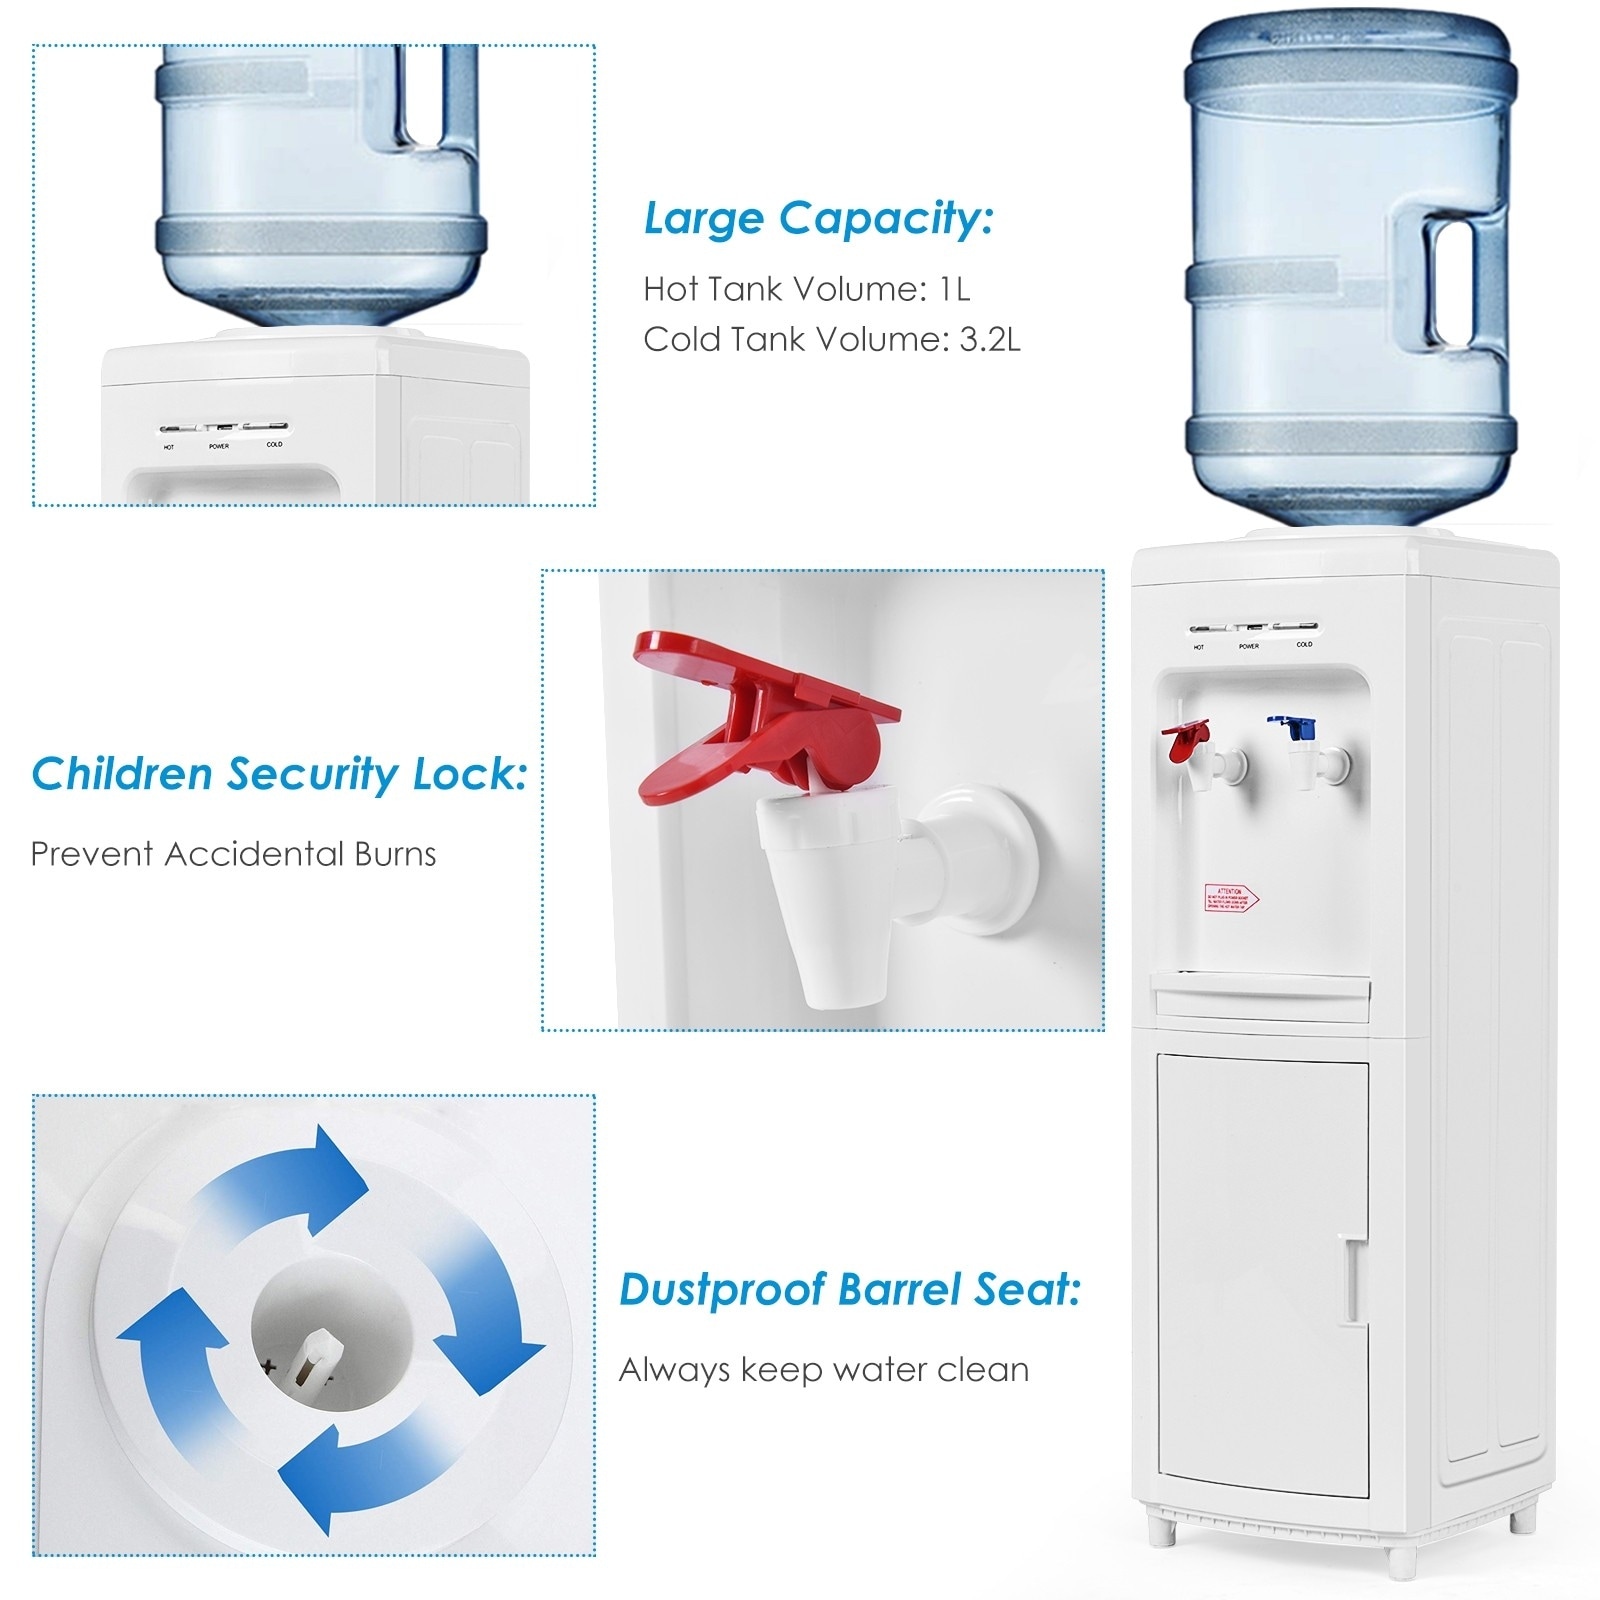 https://ak1.ostkcdn.com/images/products/is/images/direct/a74d1113d3ab0fa9d6197b04d65d864a3dcb3f73/5-Gallons-Cold-and-Hot-Water-Dispenser.jpg